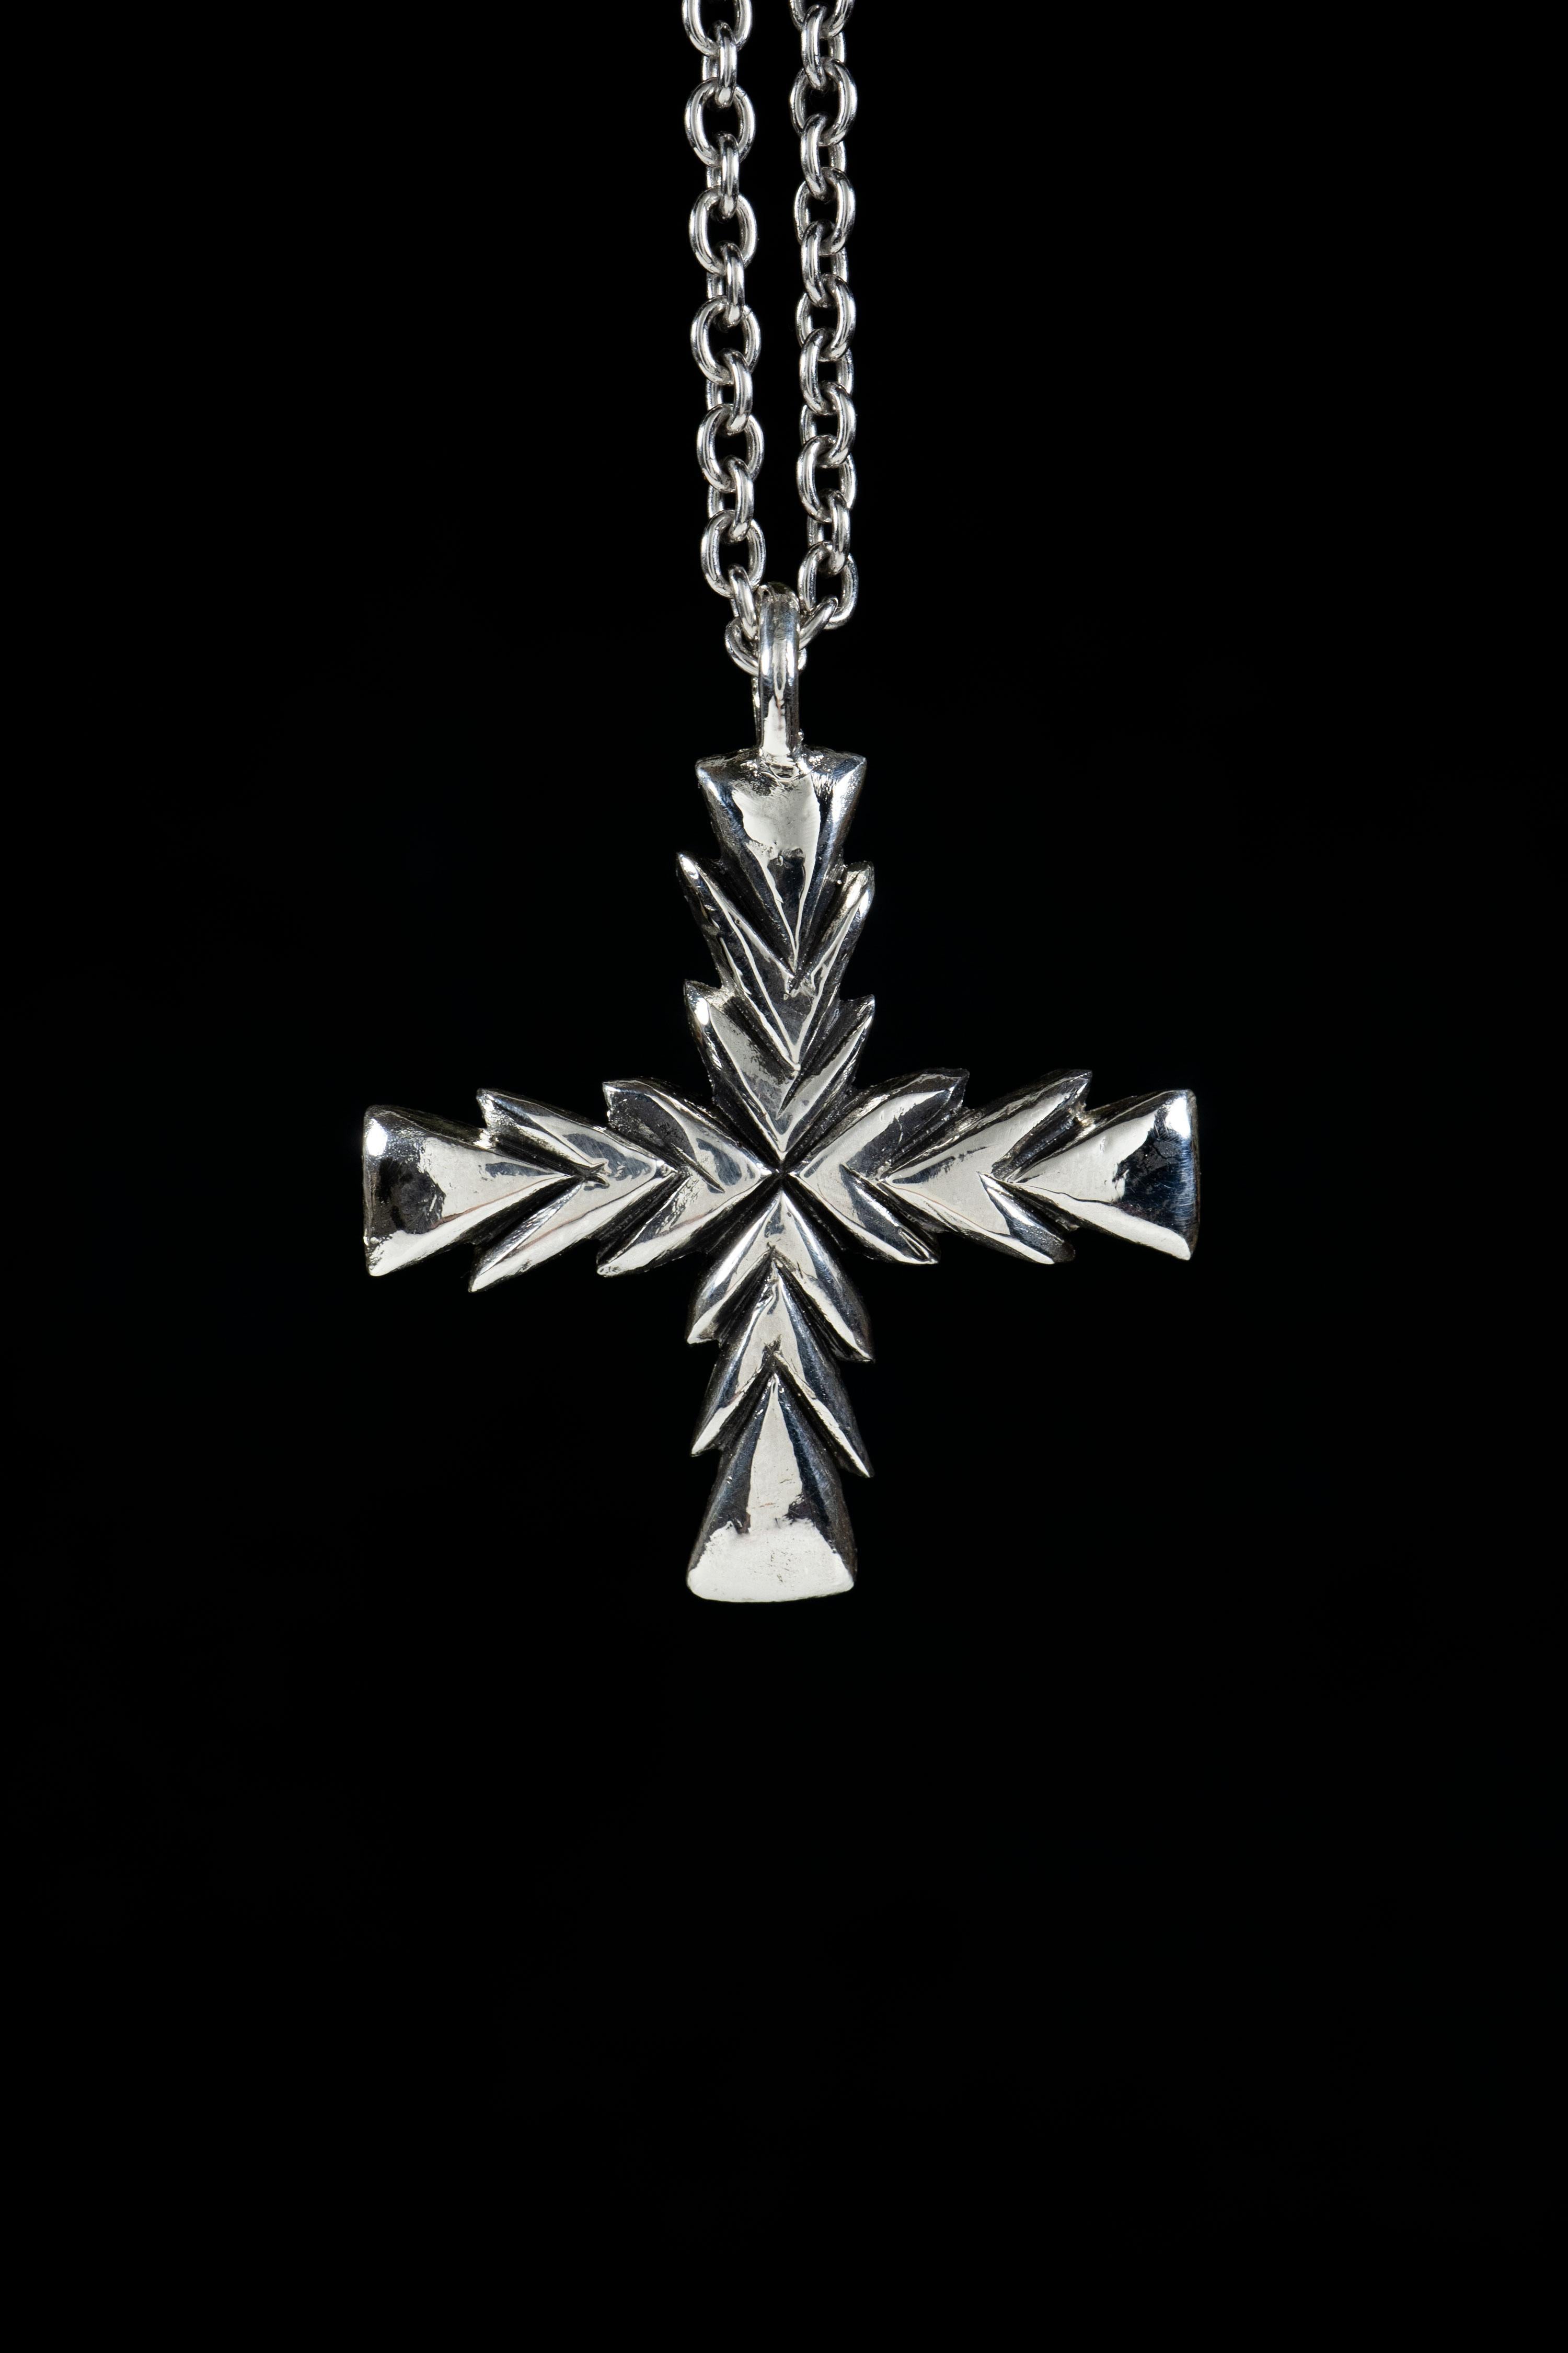 Ken Fury's original version of the cross pendant is a striking and meaningful piece of wearable art that is hand-carved and cast. The cross has a rich history that spans across many cultures and religions around the world, and this piece pays homage